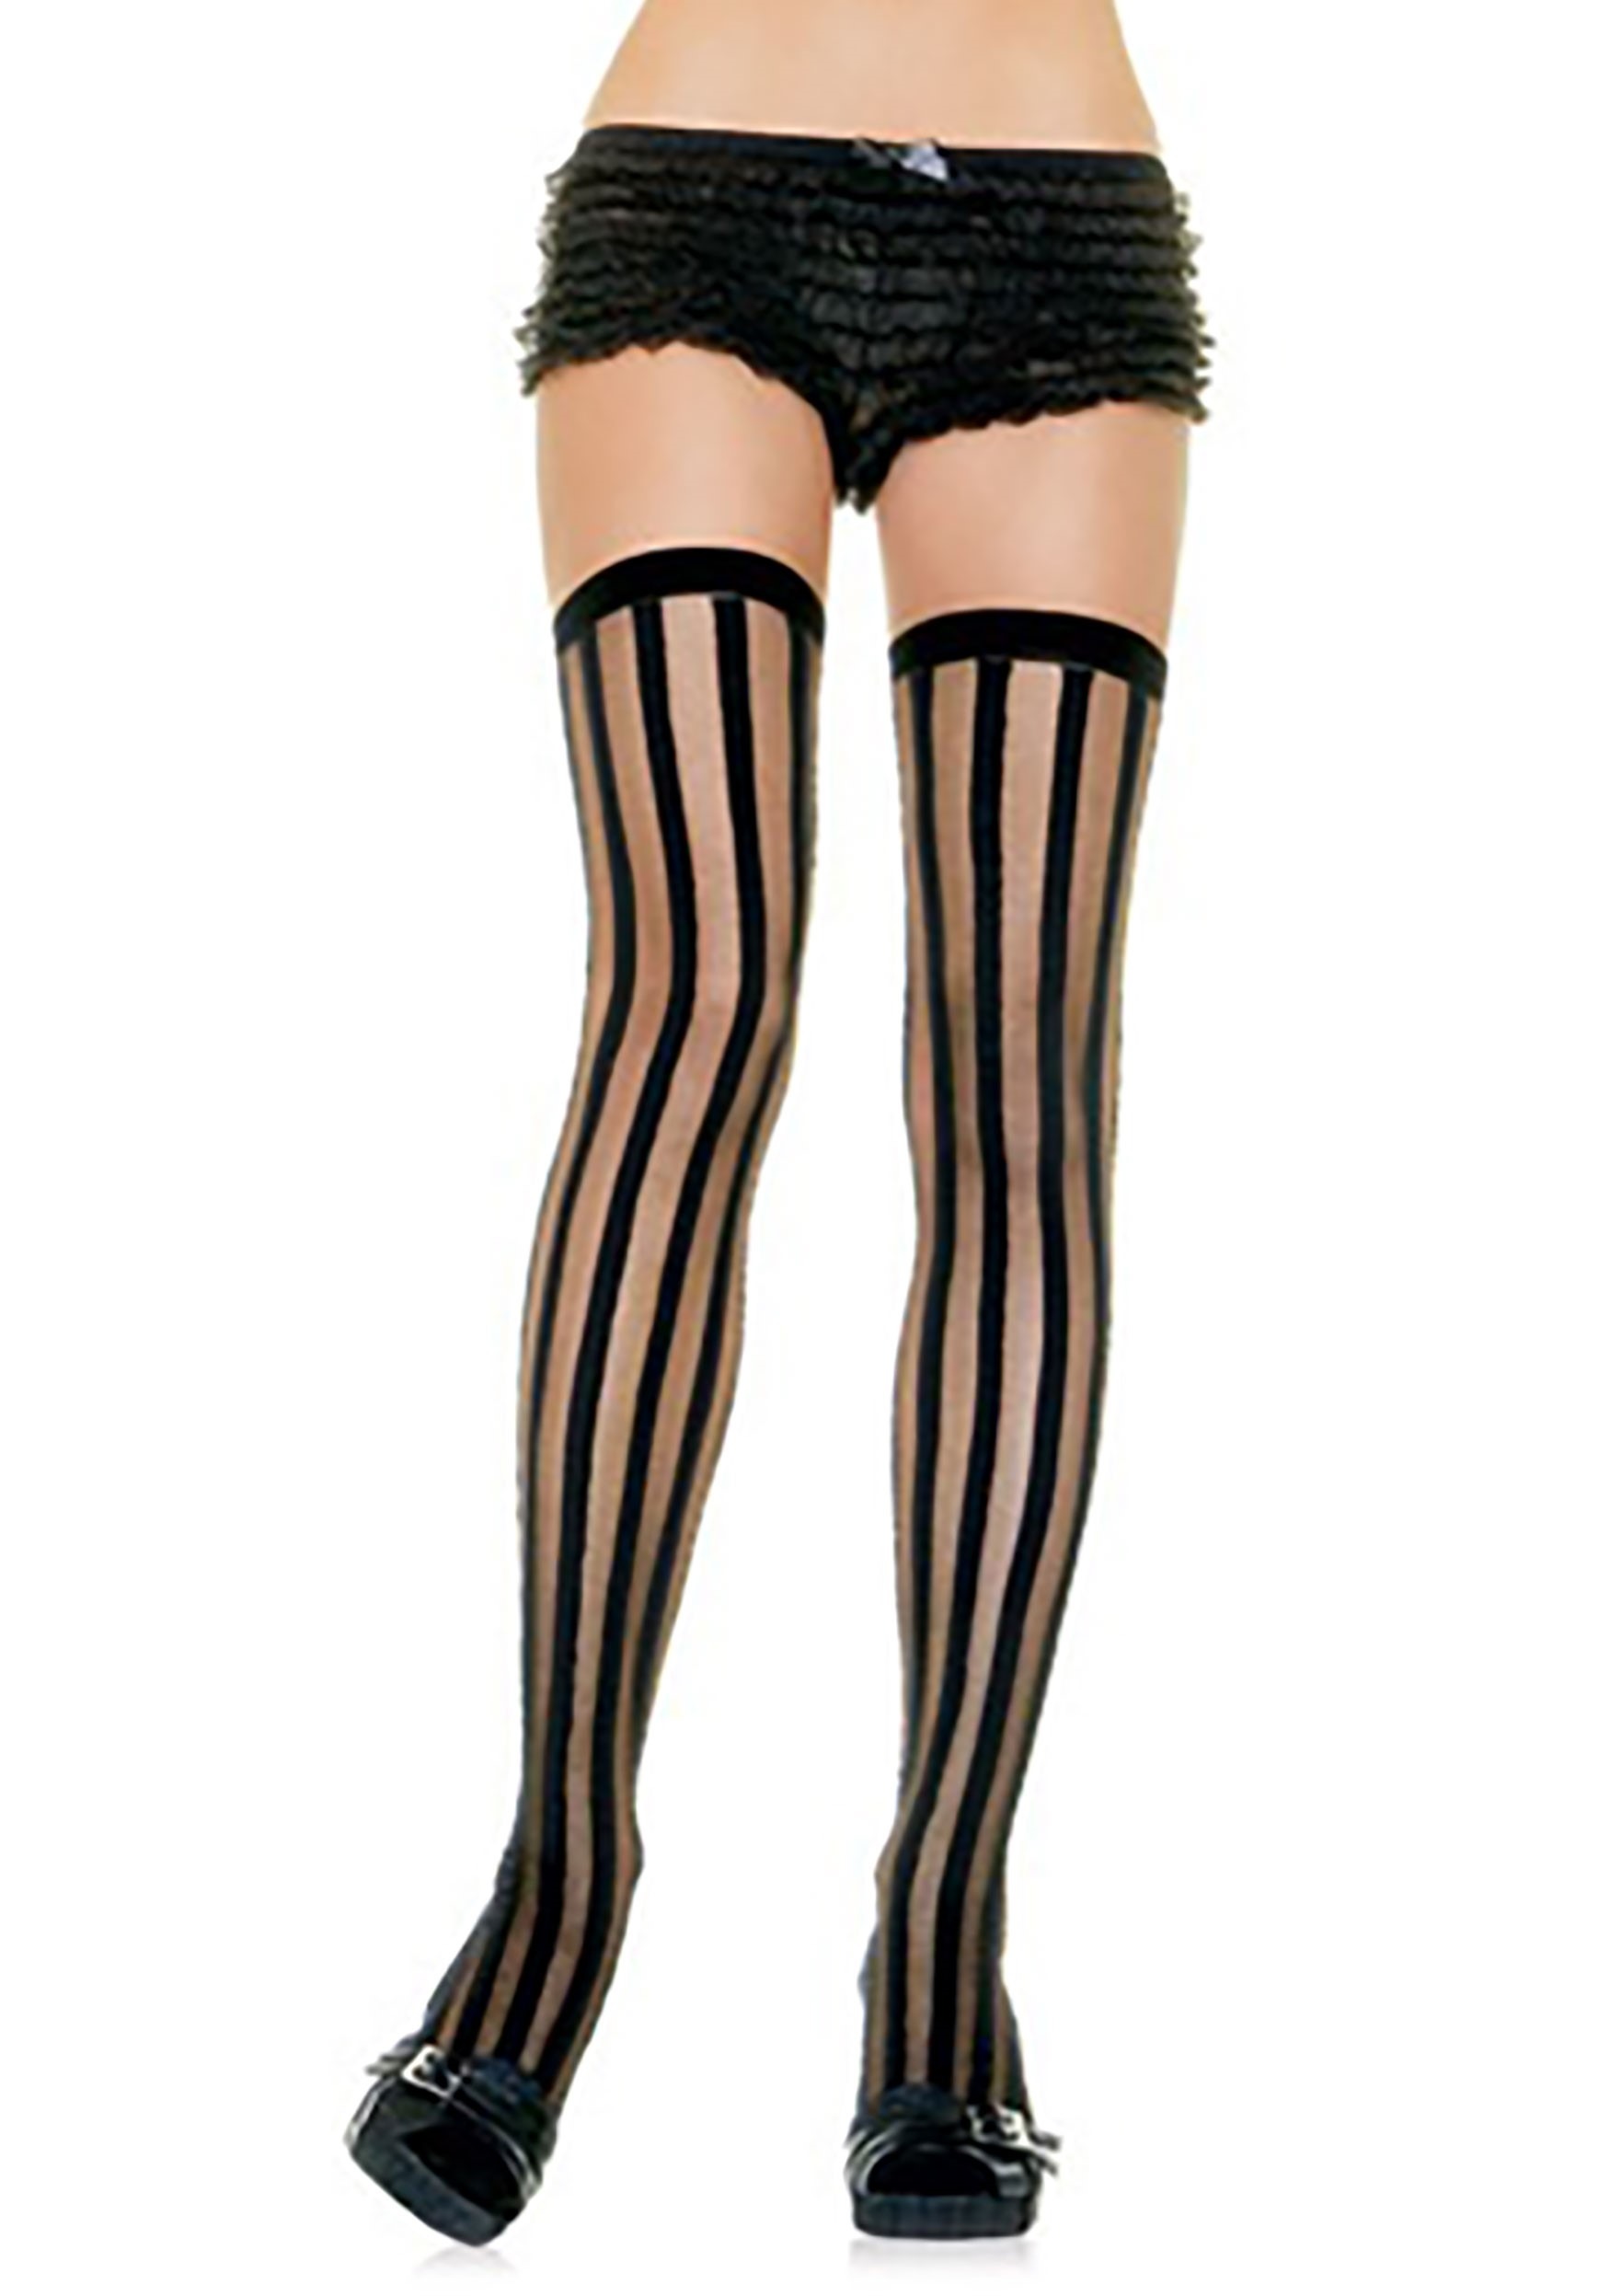 https://images.halloweencostumes.ca/products/6907/1-1/black-striped-stockings.jpg